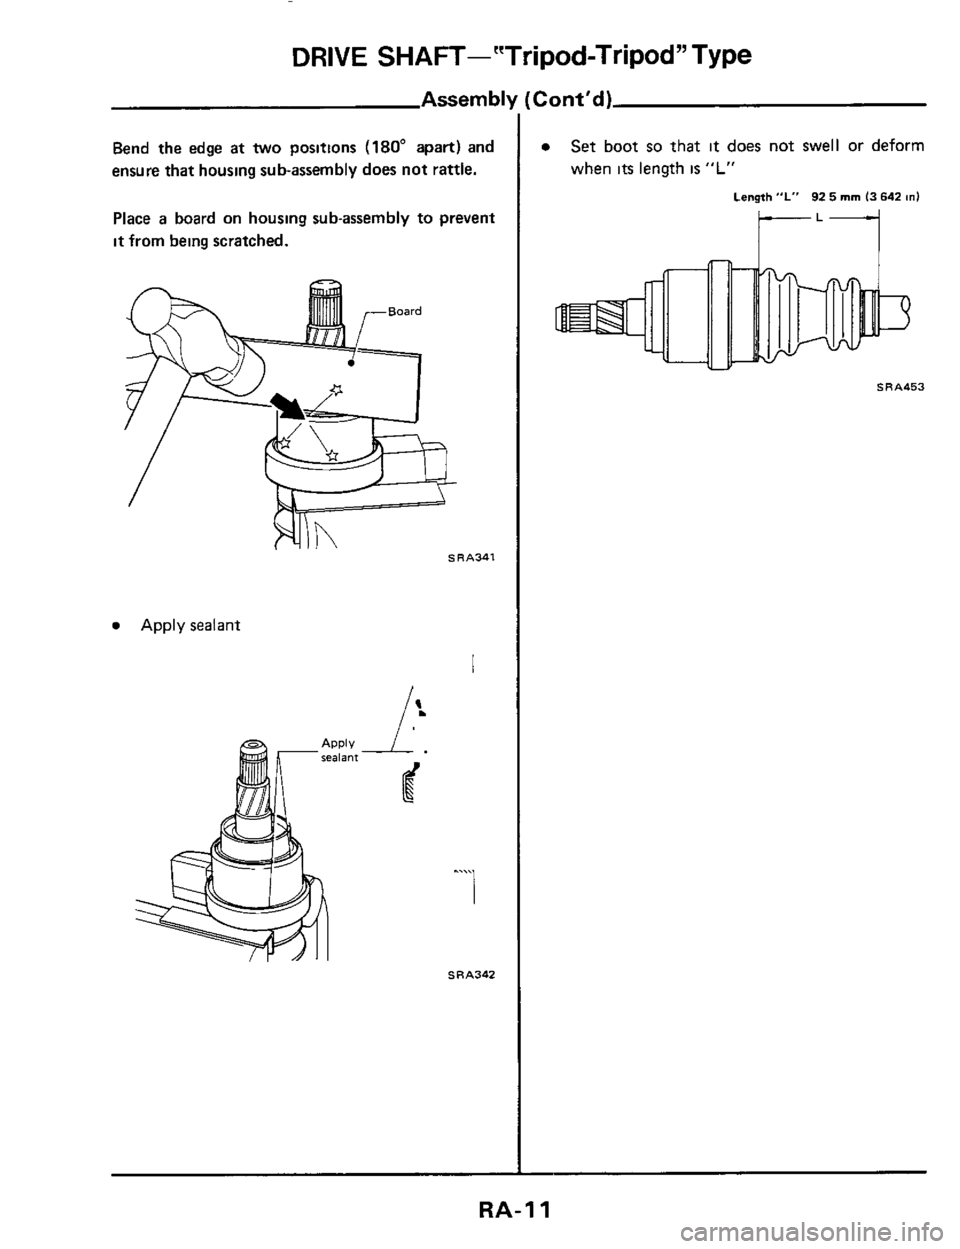 NISSAN 300ZX 1984 Z31 Rear Suspension User Guide DRIVE SHAFT--"Tripod-Tripod" Type 
Assem bl1 
Bend the edge at two positions (180" apart)  and 
ensure that housing sub-assembly  does not rattle. 
Place 
a board on housing  sub-assembly  to prevent 